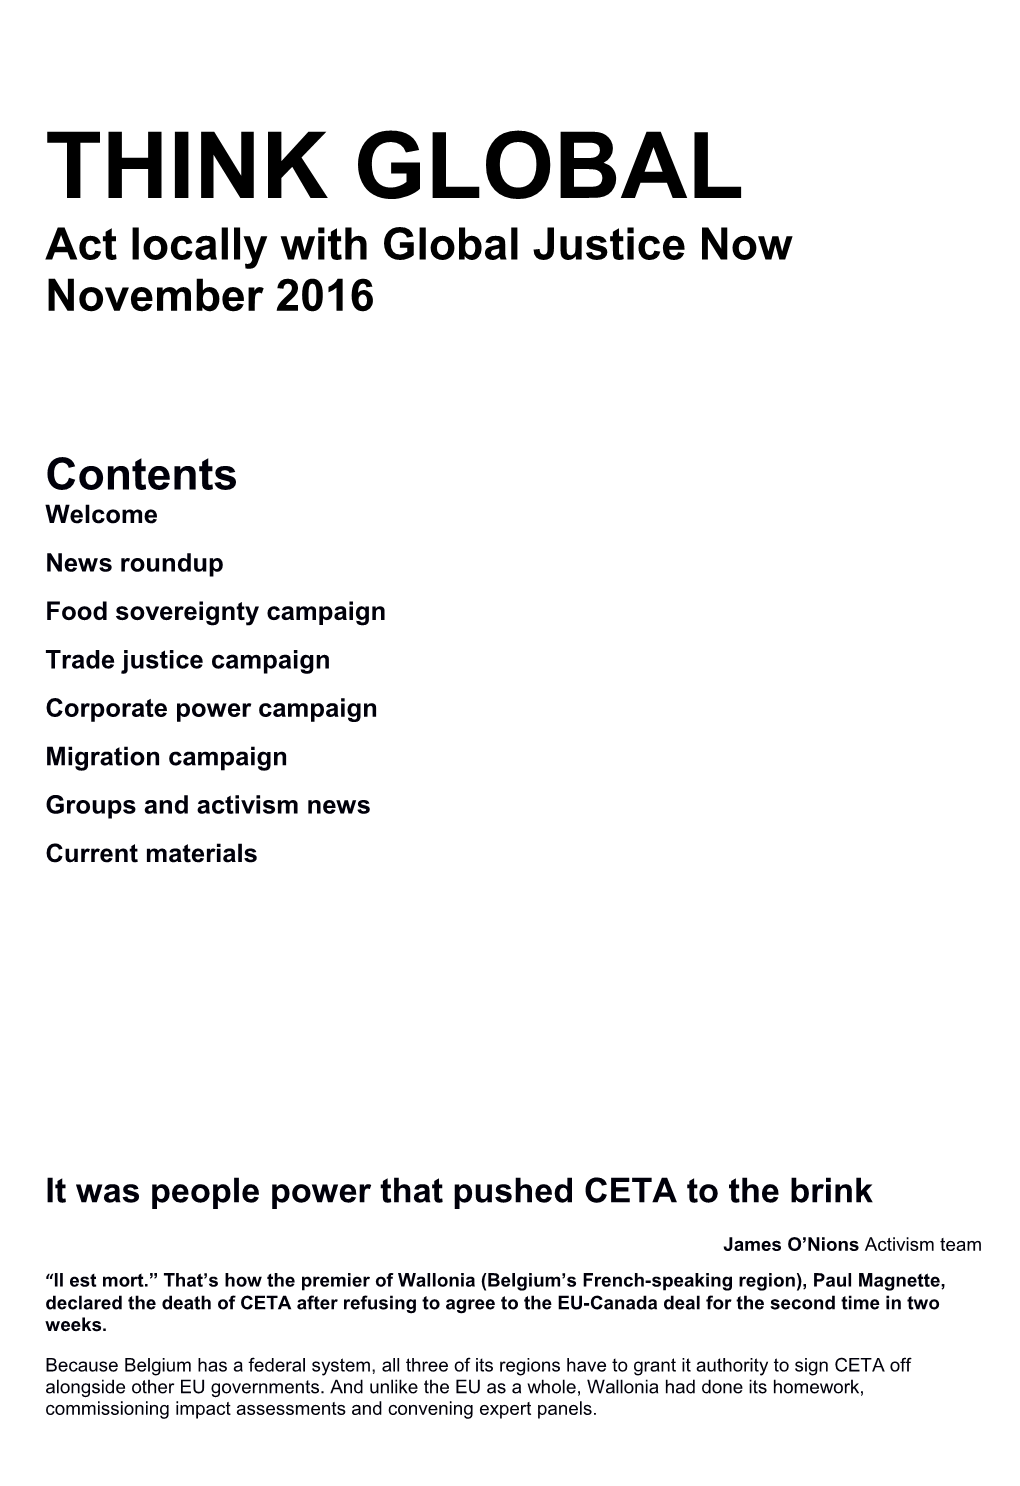 Act Locally with Global Justice Now